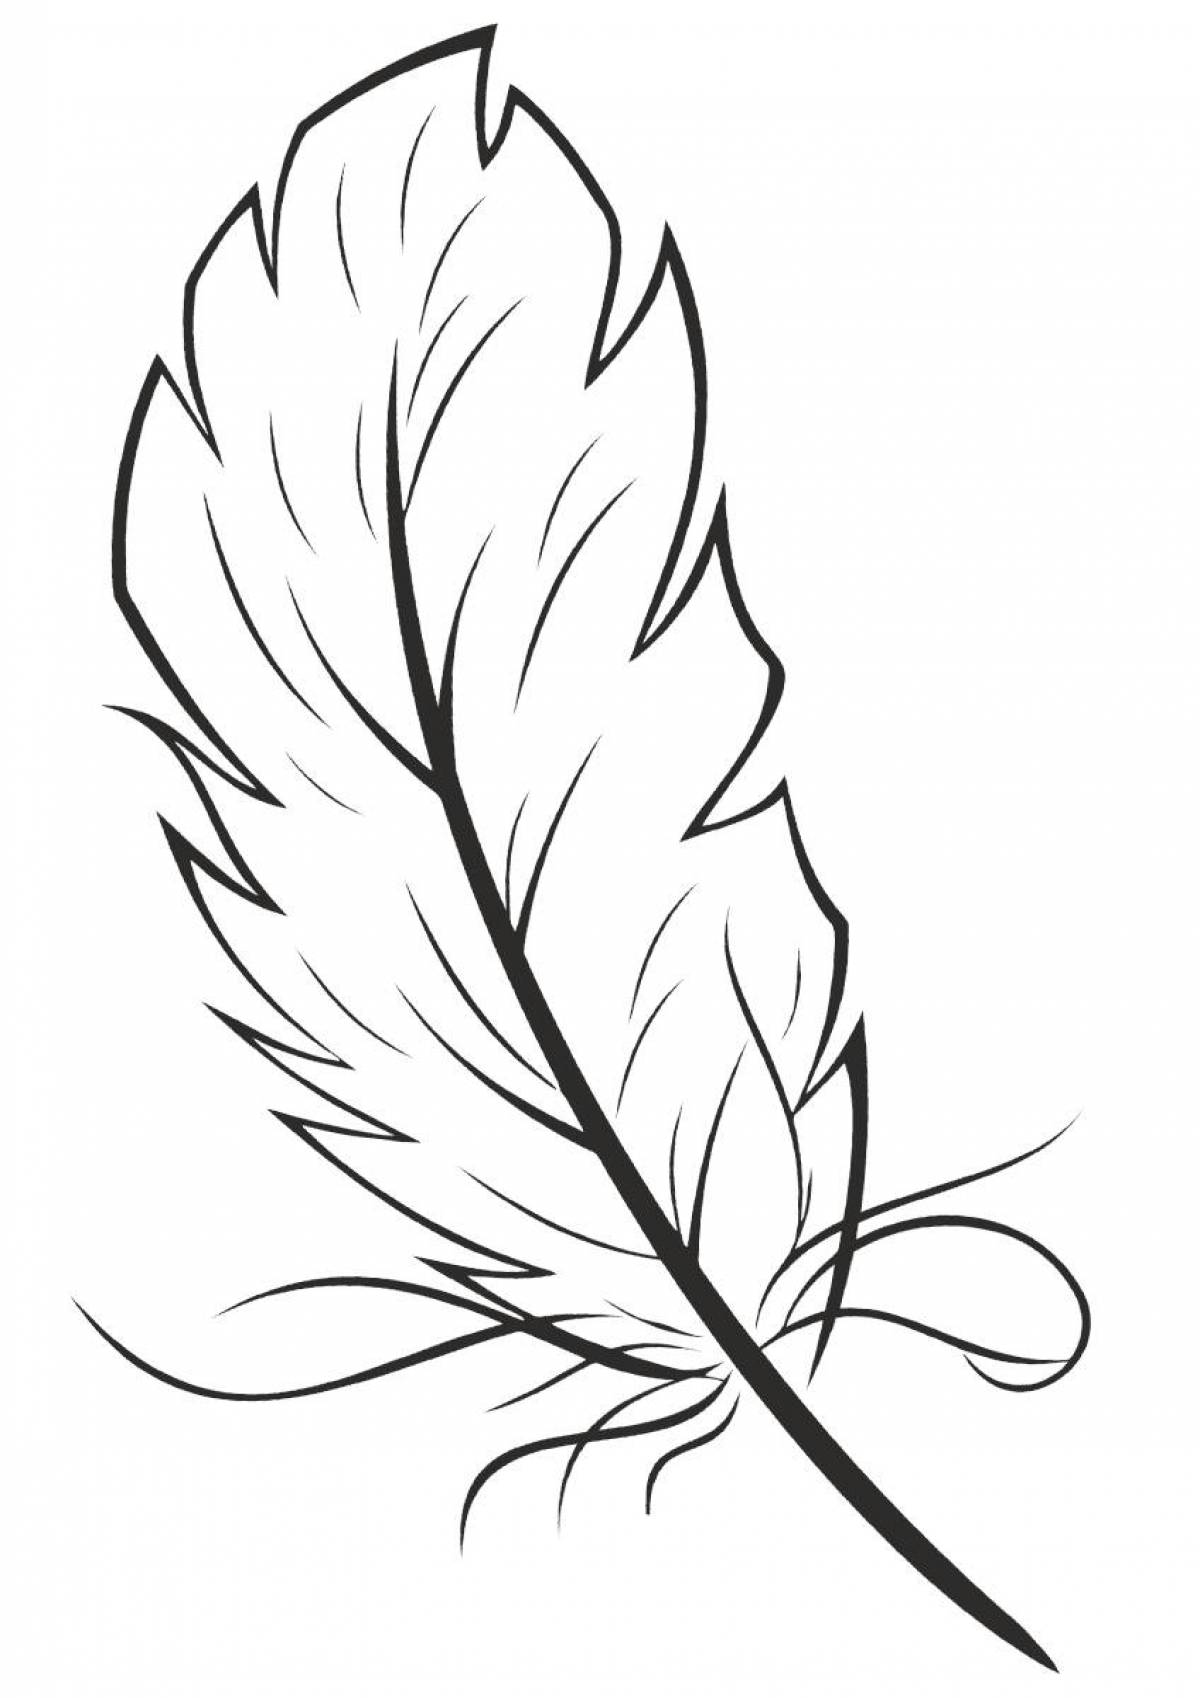 One feather